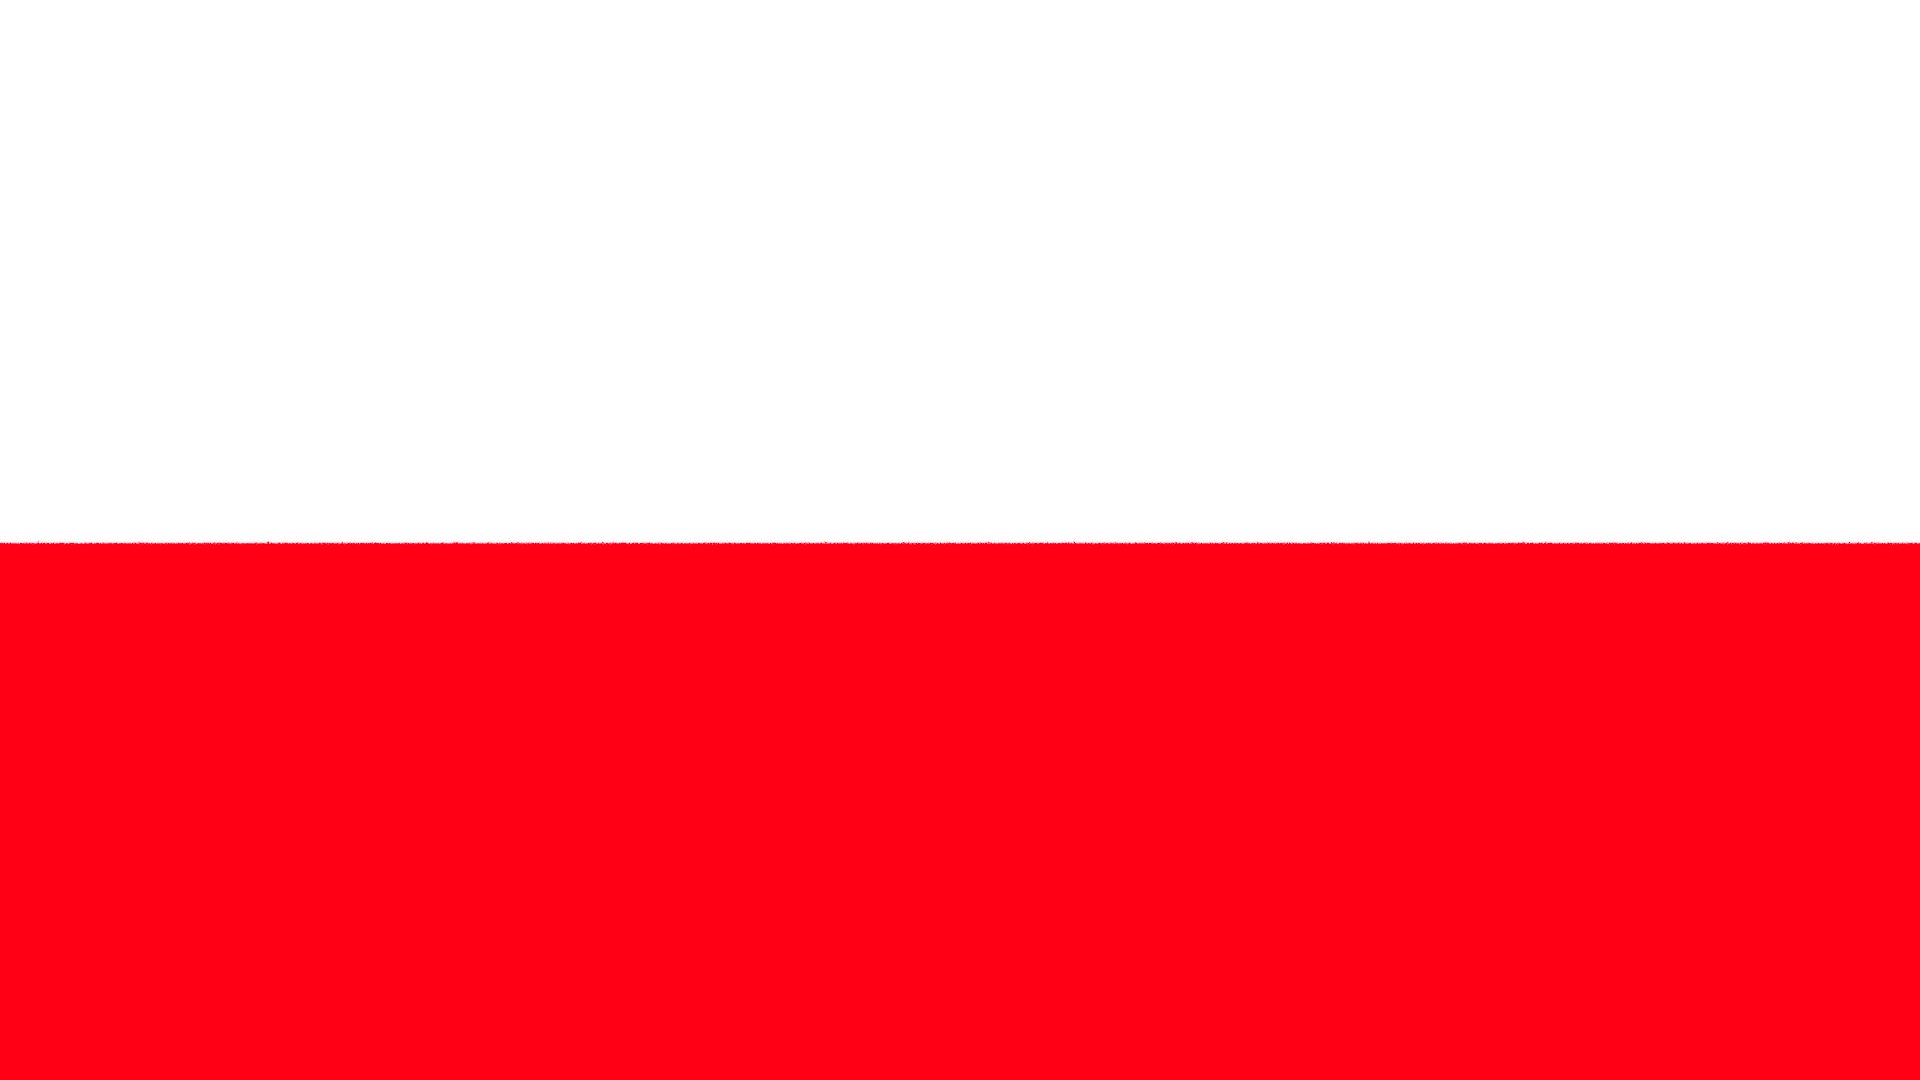 A red and white flag